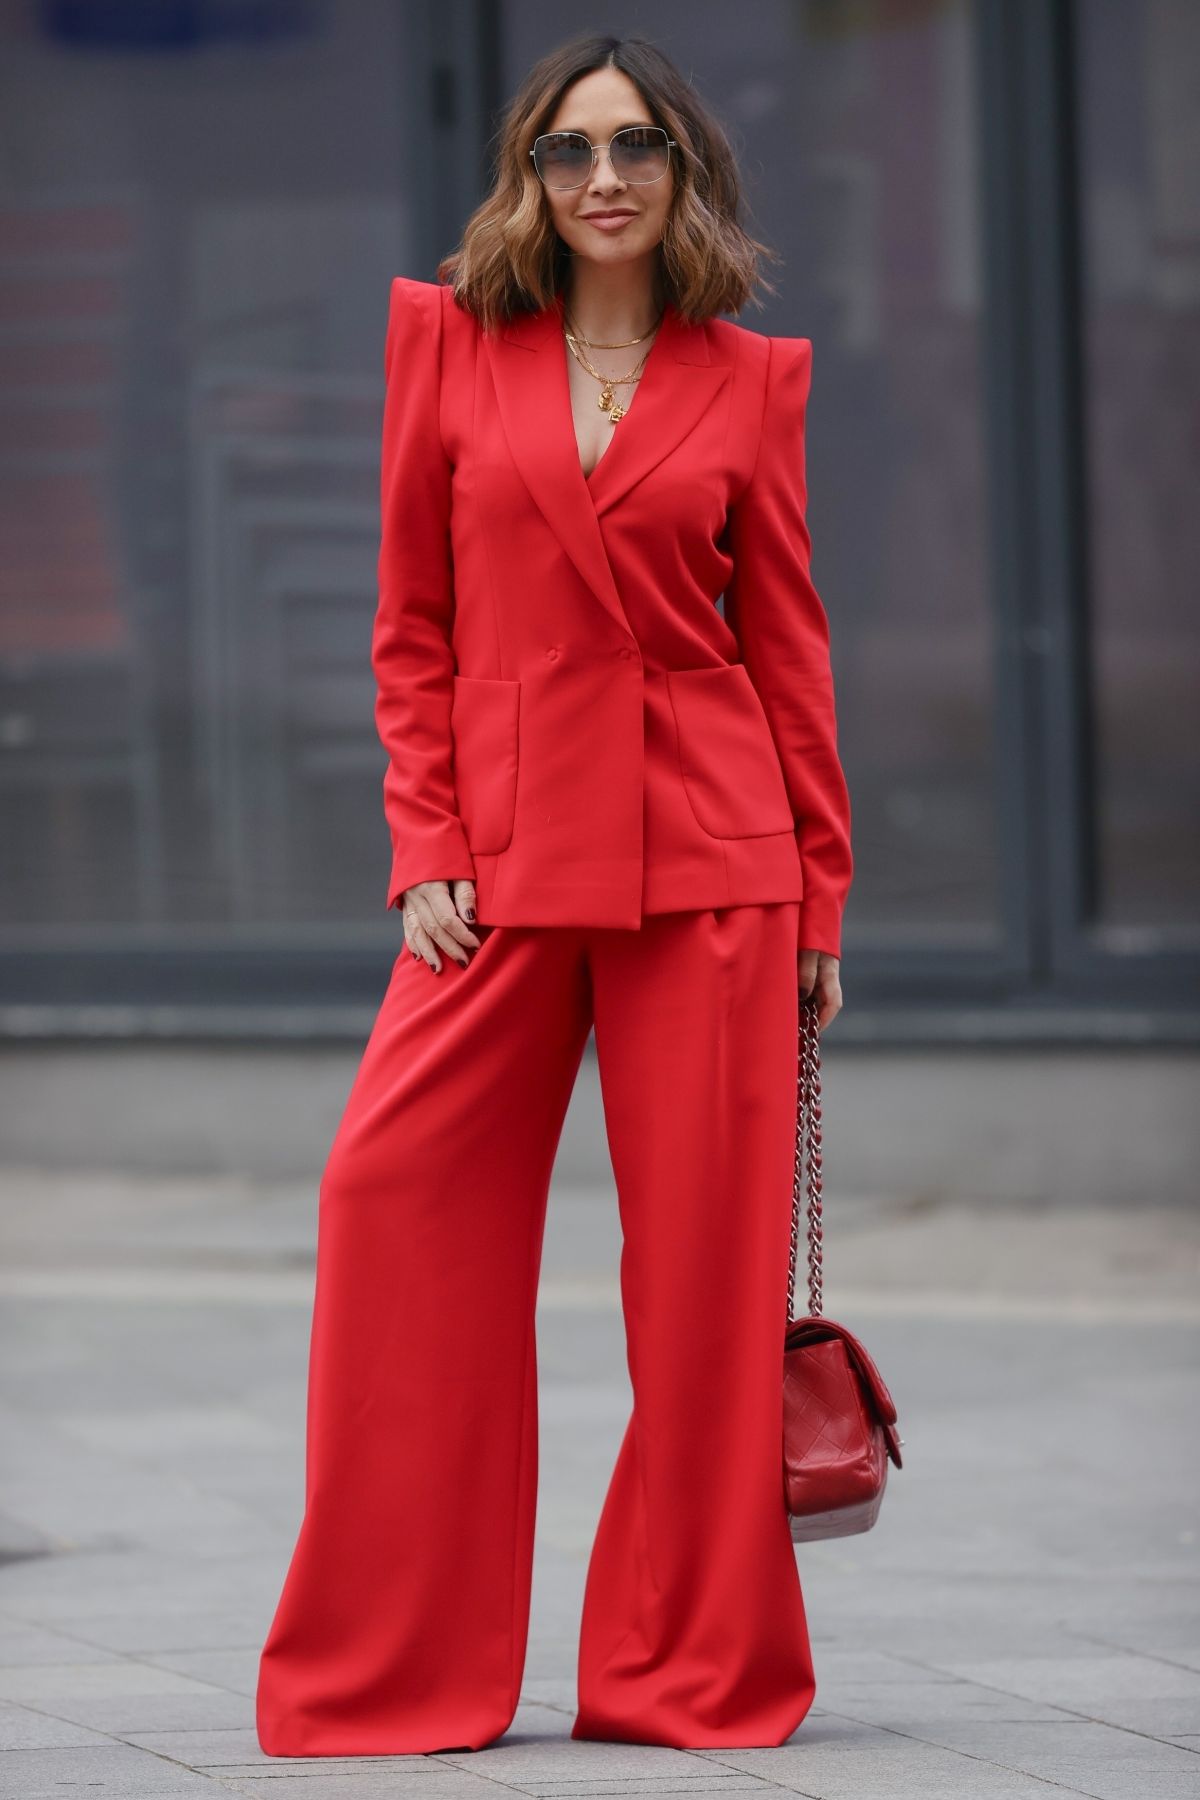 MYLEENE KLASS All in Red Arrives at Smooth Radio in London 03/20/2021 ...